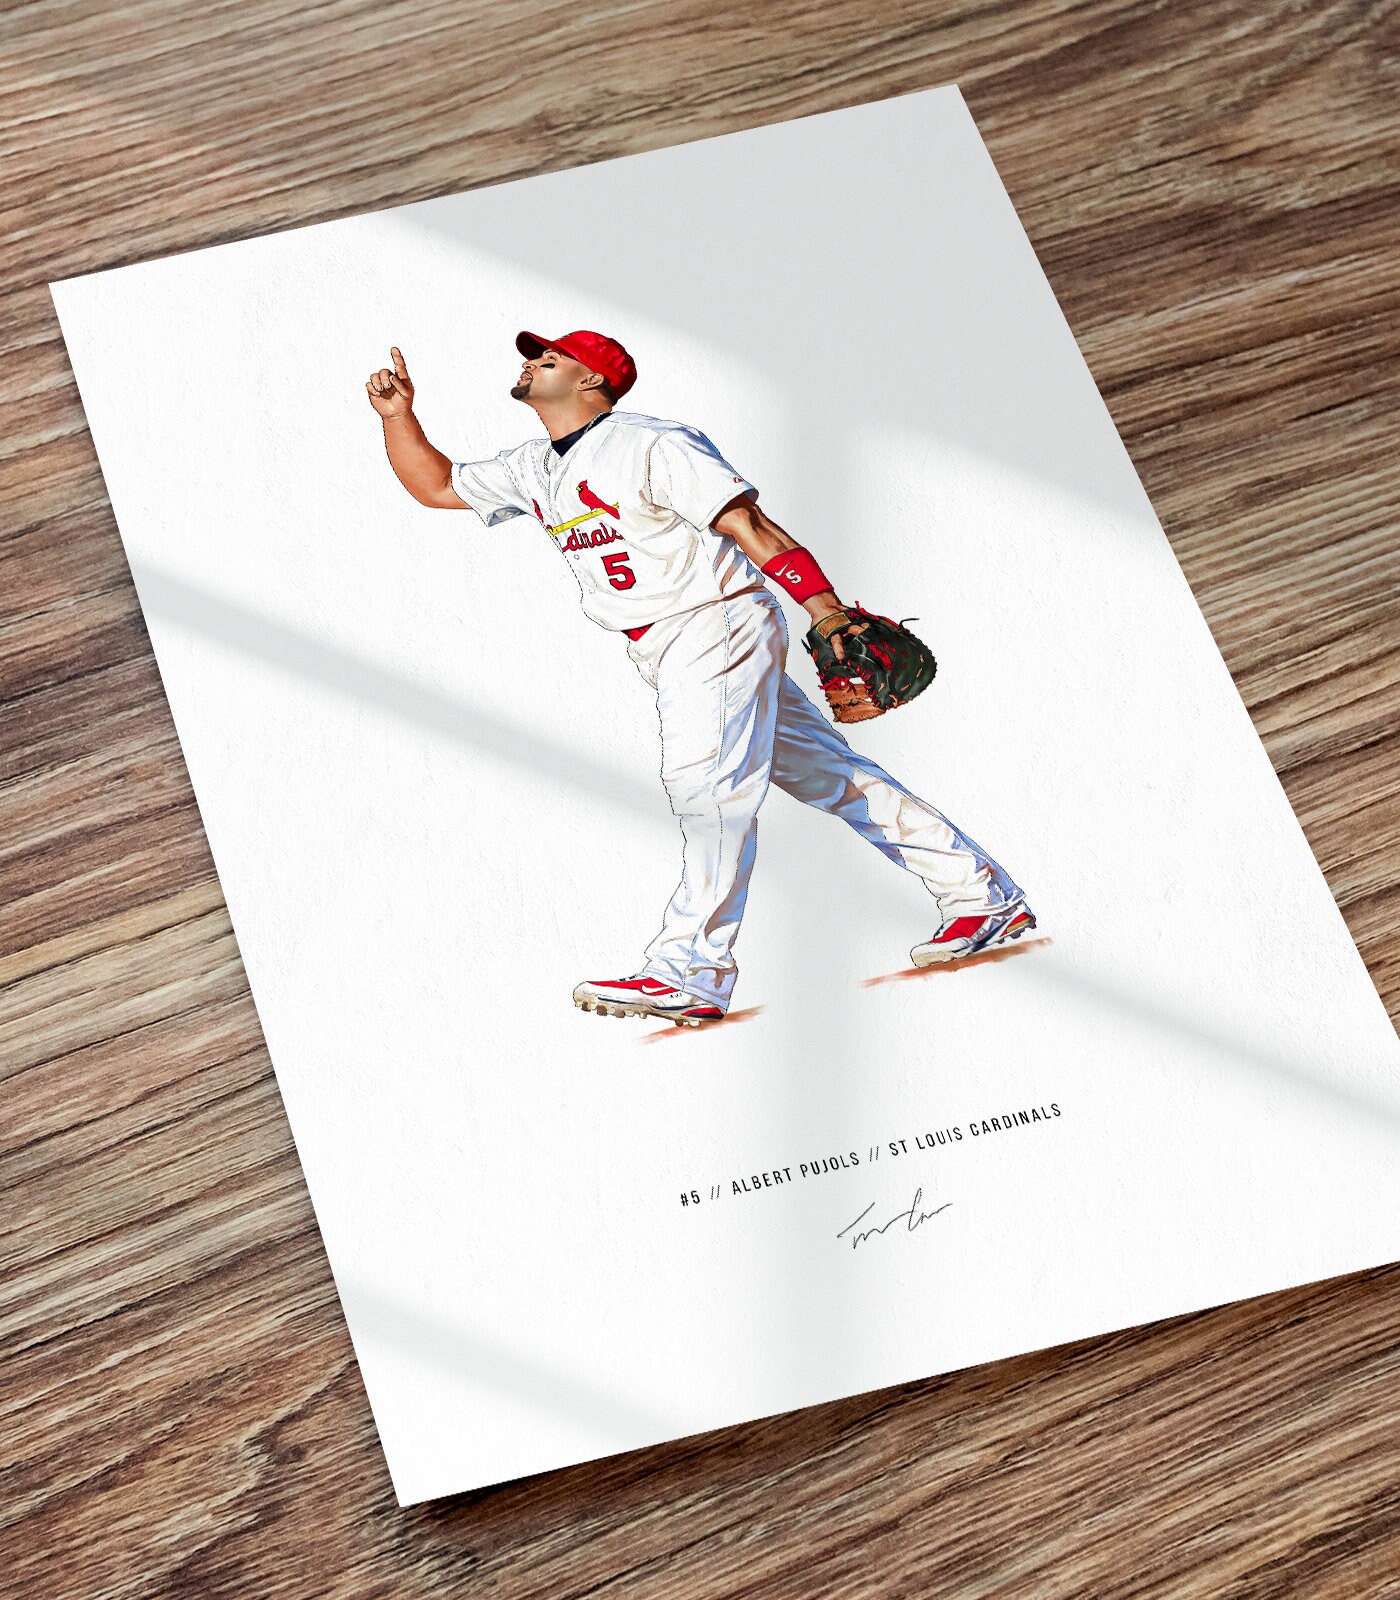  LISHINE Super Athlete Albert Pujols Poster Decorative Painting  Canvas Wall Art Living Room Posters Bedroom Painting Unframe-Style  24x36inch(60x90cm): Posters & Prints